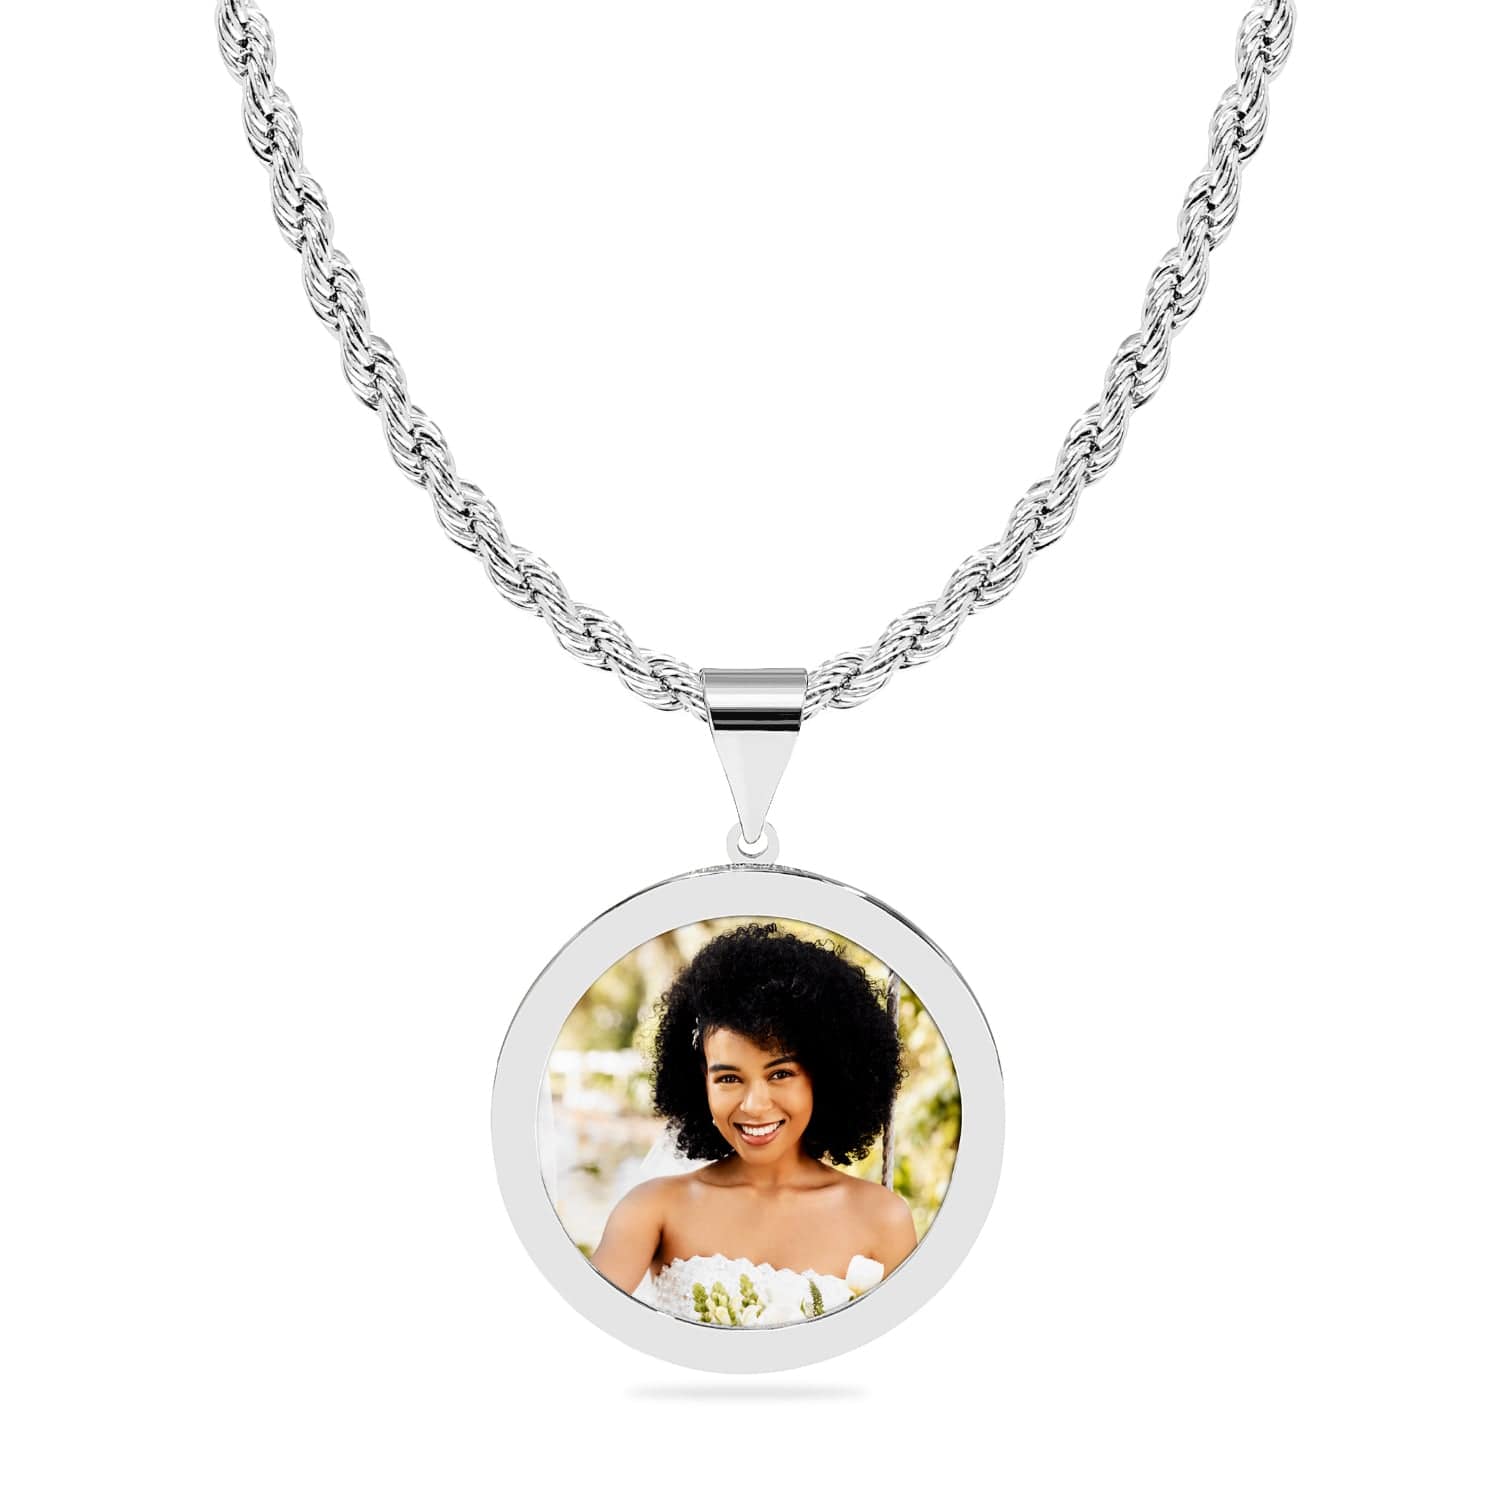 14k Gold over Sterling Silver / Rope Chain Round Photo Pendant High Polished